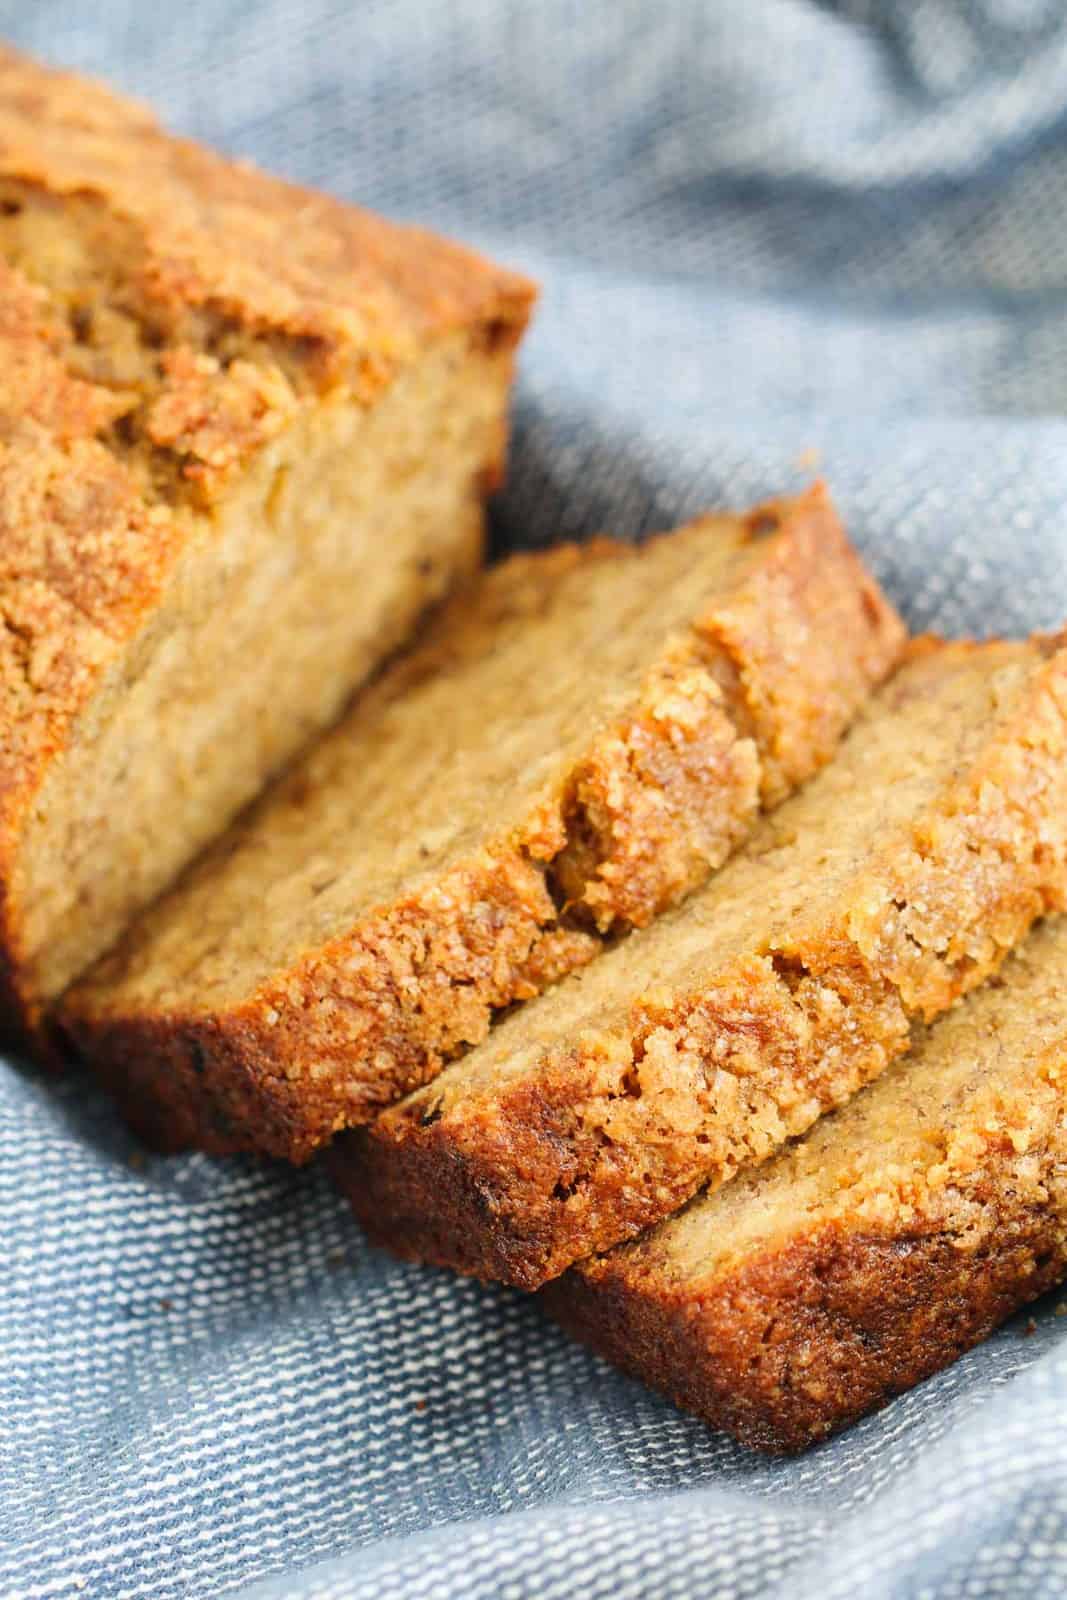 Slices of banana loaf with a crunchy top, resting on a blue tea towel.